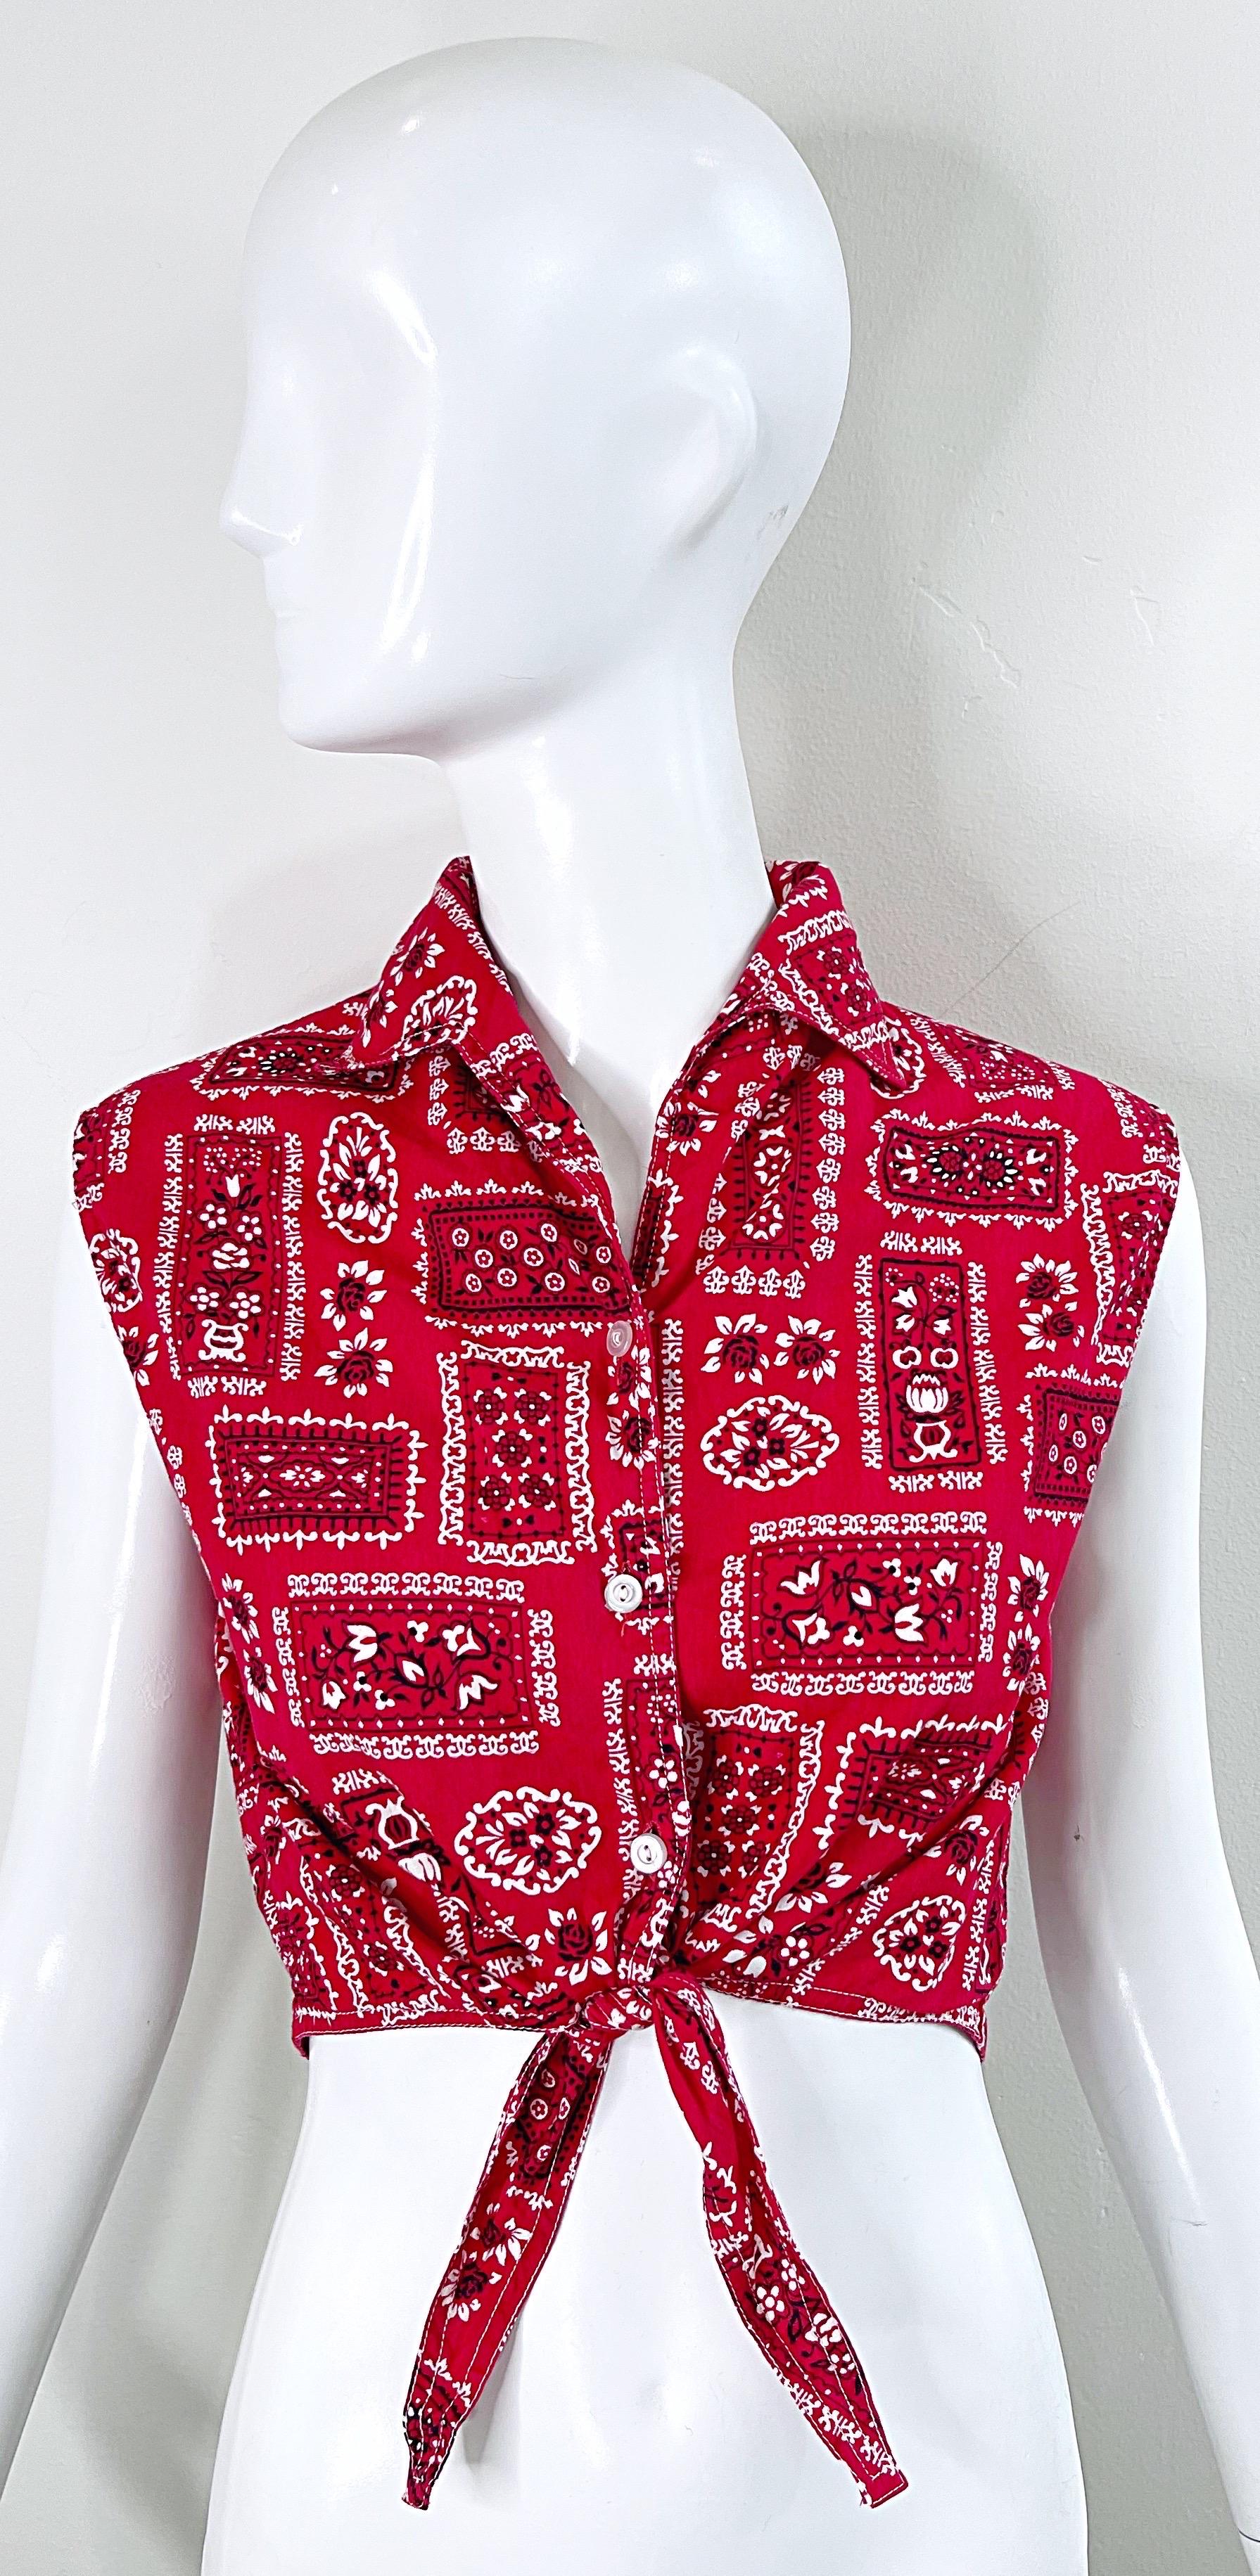 Chic 1950s red and white sleeveless western cotton crop top ! Features buttons up the front, and ties shut at center waist. Great with pants, a skirt, shorts or jeans. In great condition
Made in USA
Approximately Size Small / Medium
Measurements:
36